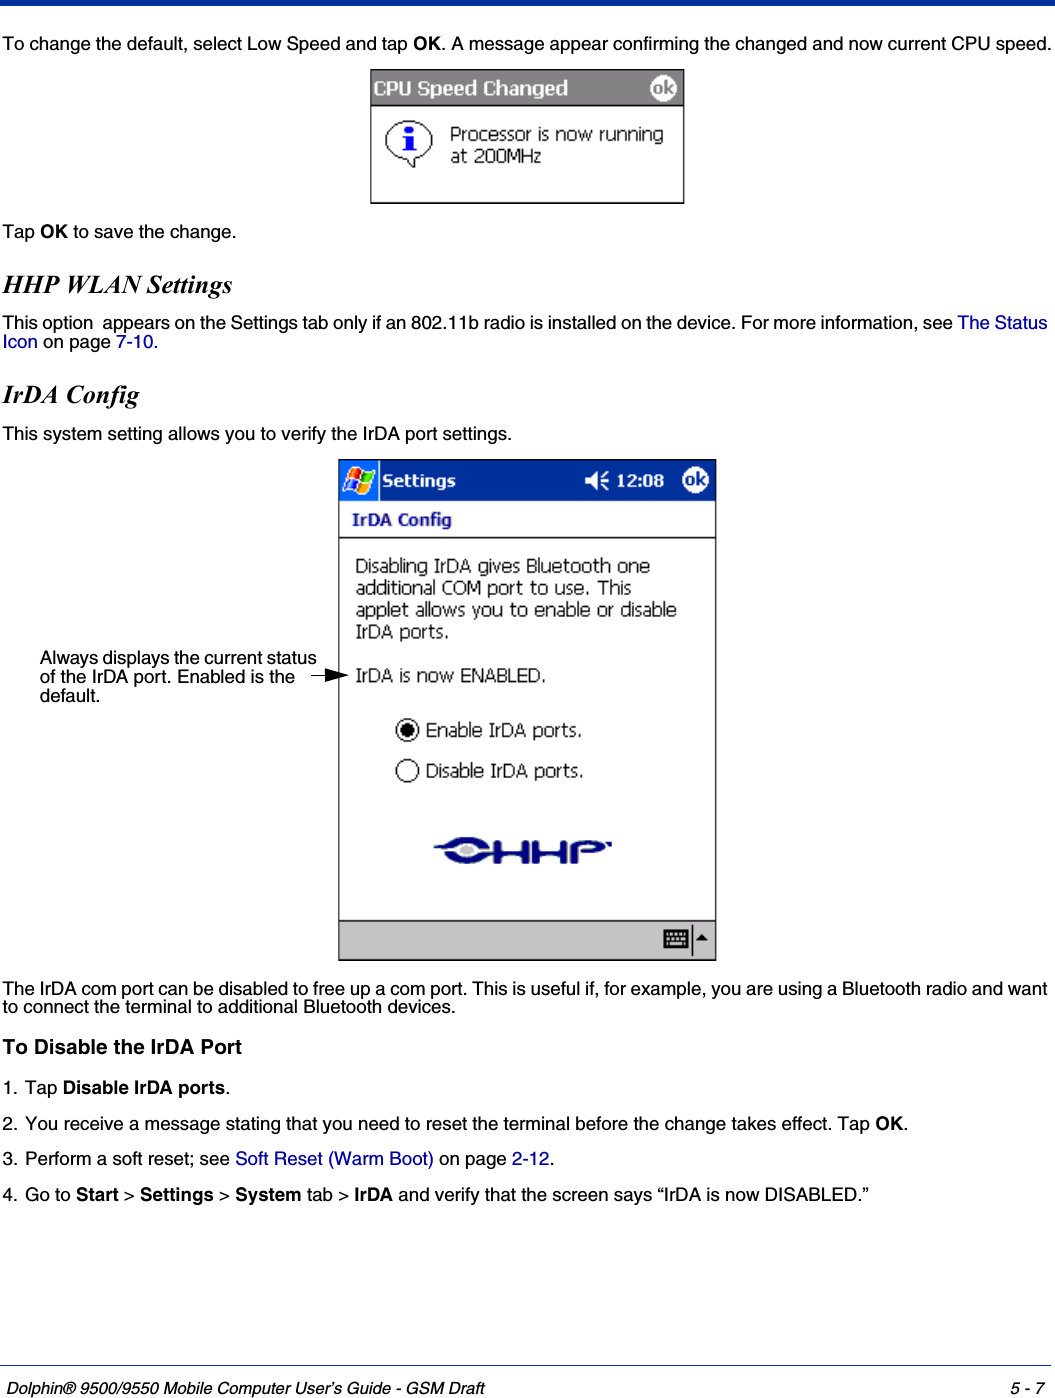 Dolphin® 9500/9550 Mobile Computer User’s Guide - GSM Draft 5 - 7To change the default, select Low Speed and tap OK. A message appear confirming the changed and now current CPU speed.Tap OK to save the change.HHP WLAN SettingsThis option  appears on the Settings tab only if an 802.11b radio is installed on the device. For more information, see The Status Icon on page 7-10.IrDA ConfigThis system setting allows you to verify the IrDA port settings.The IrDA com port can be disabled to free up a com port. This is useful if, for example, you are using a Bluetooth radio and want to connect the terminal to additional Bluetooth devices.To Disable the IrDA Port1. Tap Disable IrDA ports. 2. You receive a message stating that you need to reset the terminal before the change takes effect. Tap OK.3. Perform a soft reset; see Soft Reset (Warm Boot) on page 2-12.4. Go to Start &gt; Settings &gt; System tab &gt; IrDA and verify that the screen says “IrDA is now DISABLED.”Always displays the current status of the IrDA port. Enabled is the default.